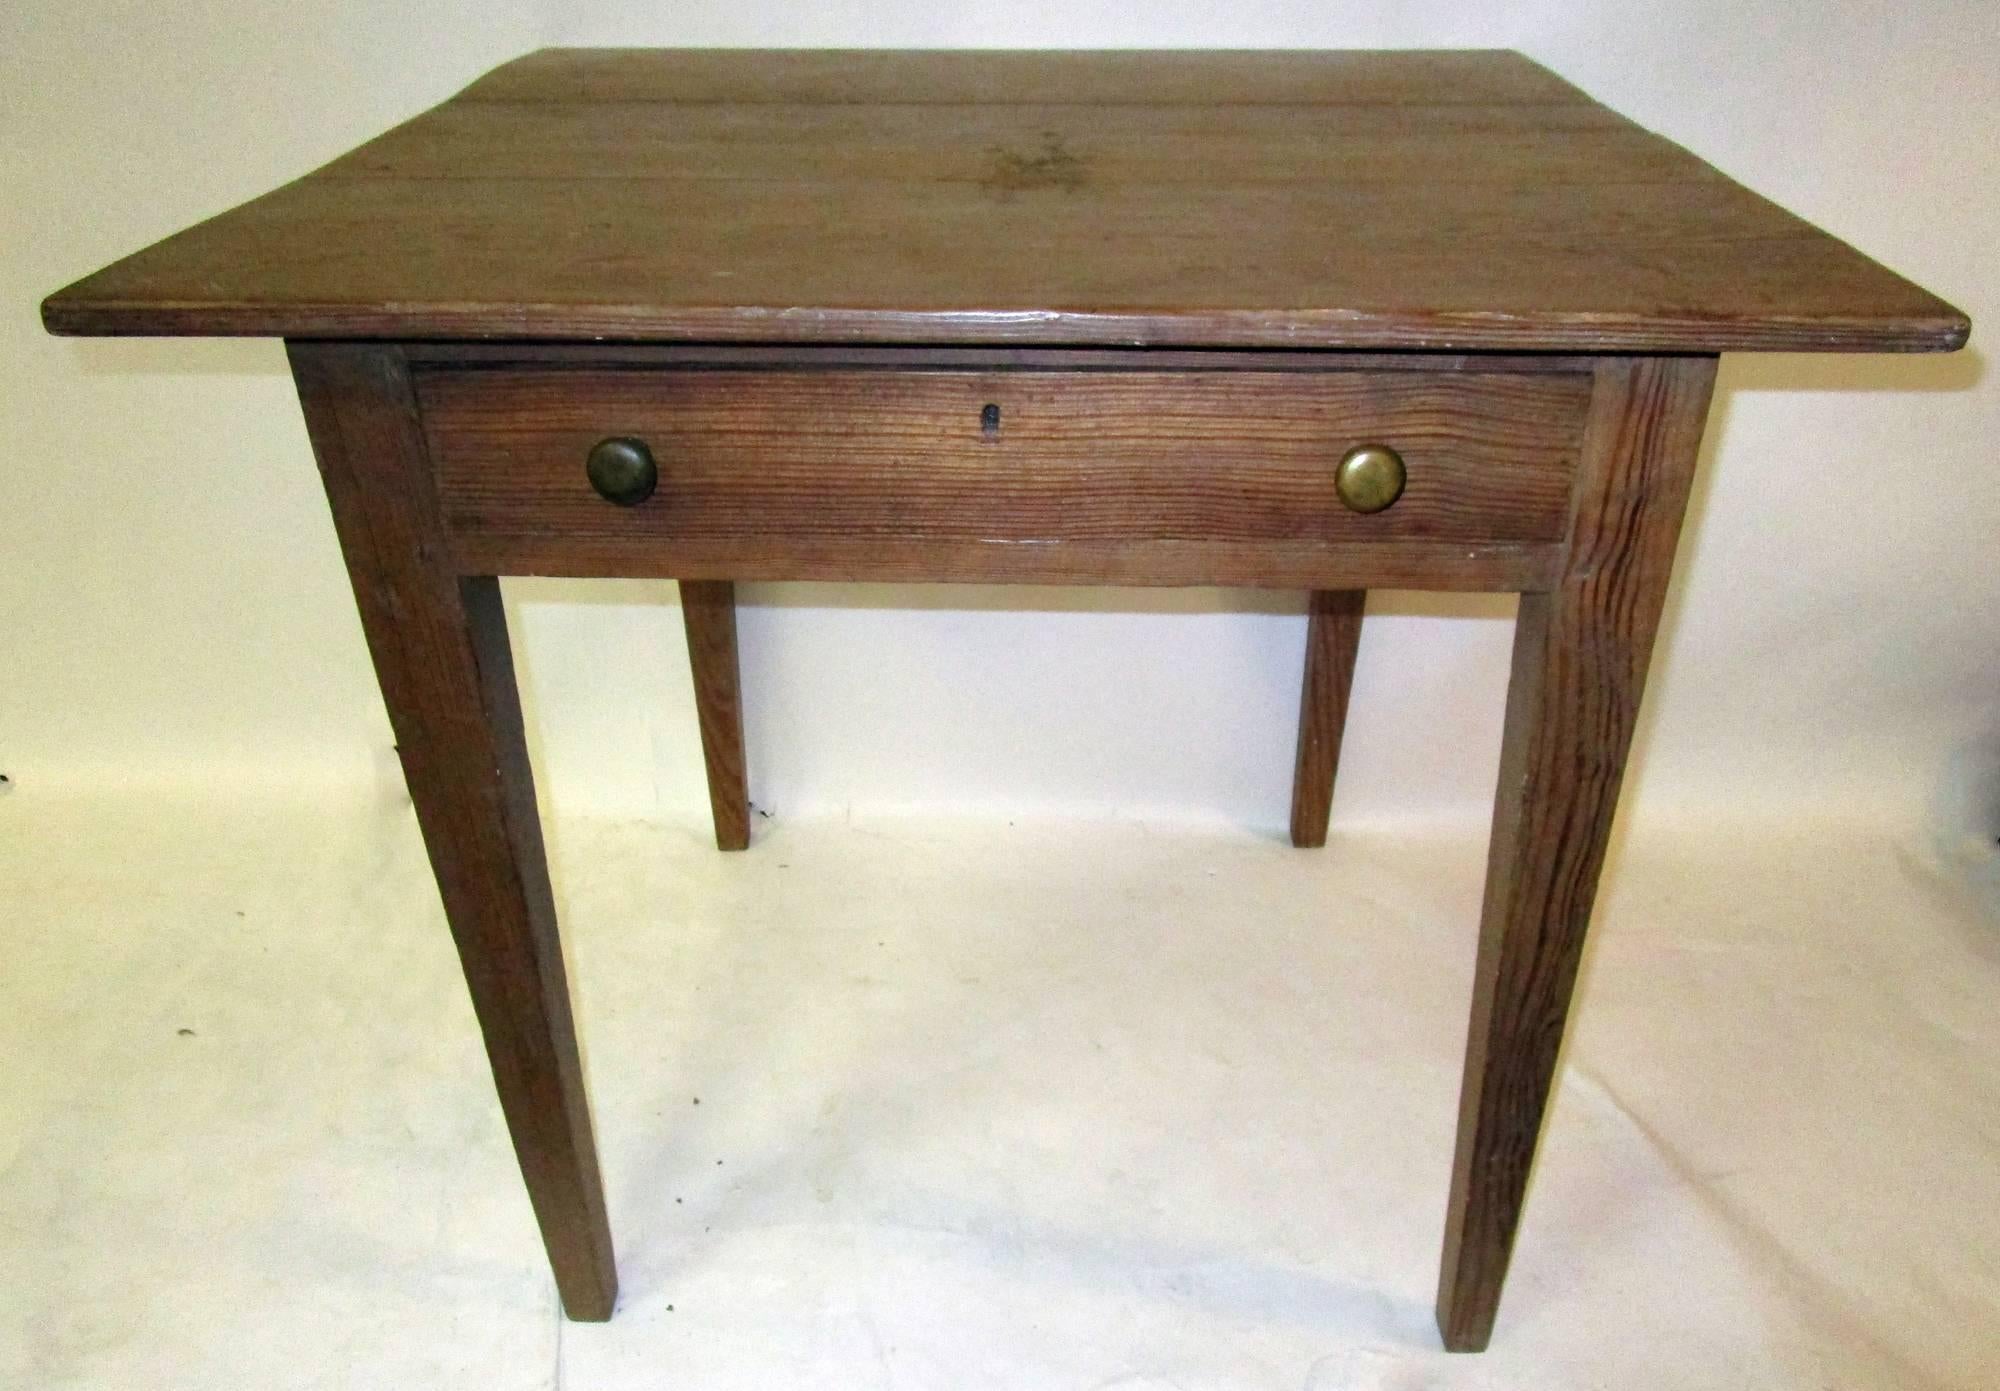 From Mississippi river plantation in Louisiana, this kitchen work table features one drawer with painted interior surface, square tapered legs and old brass pulls. See measurements below.